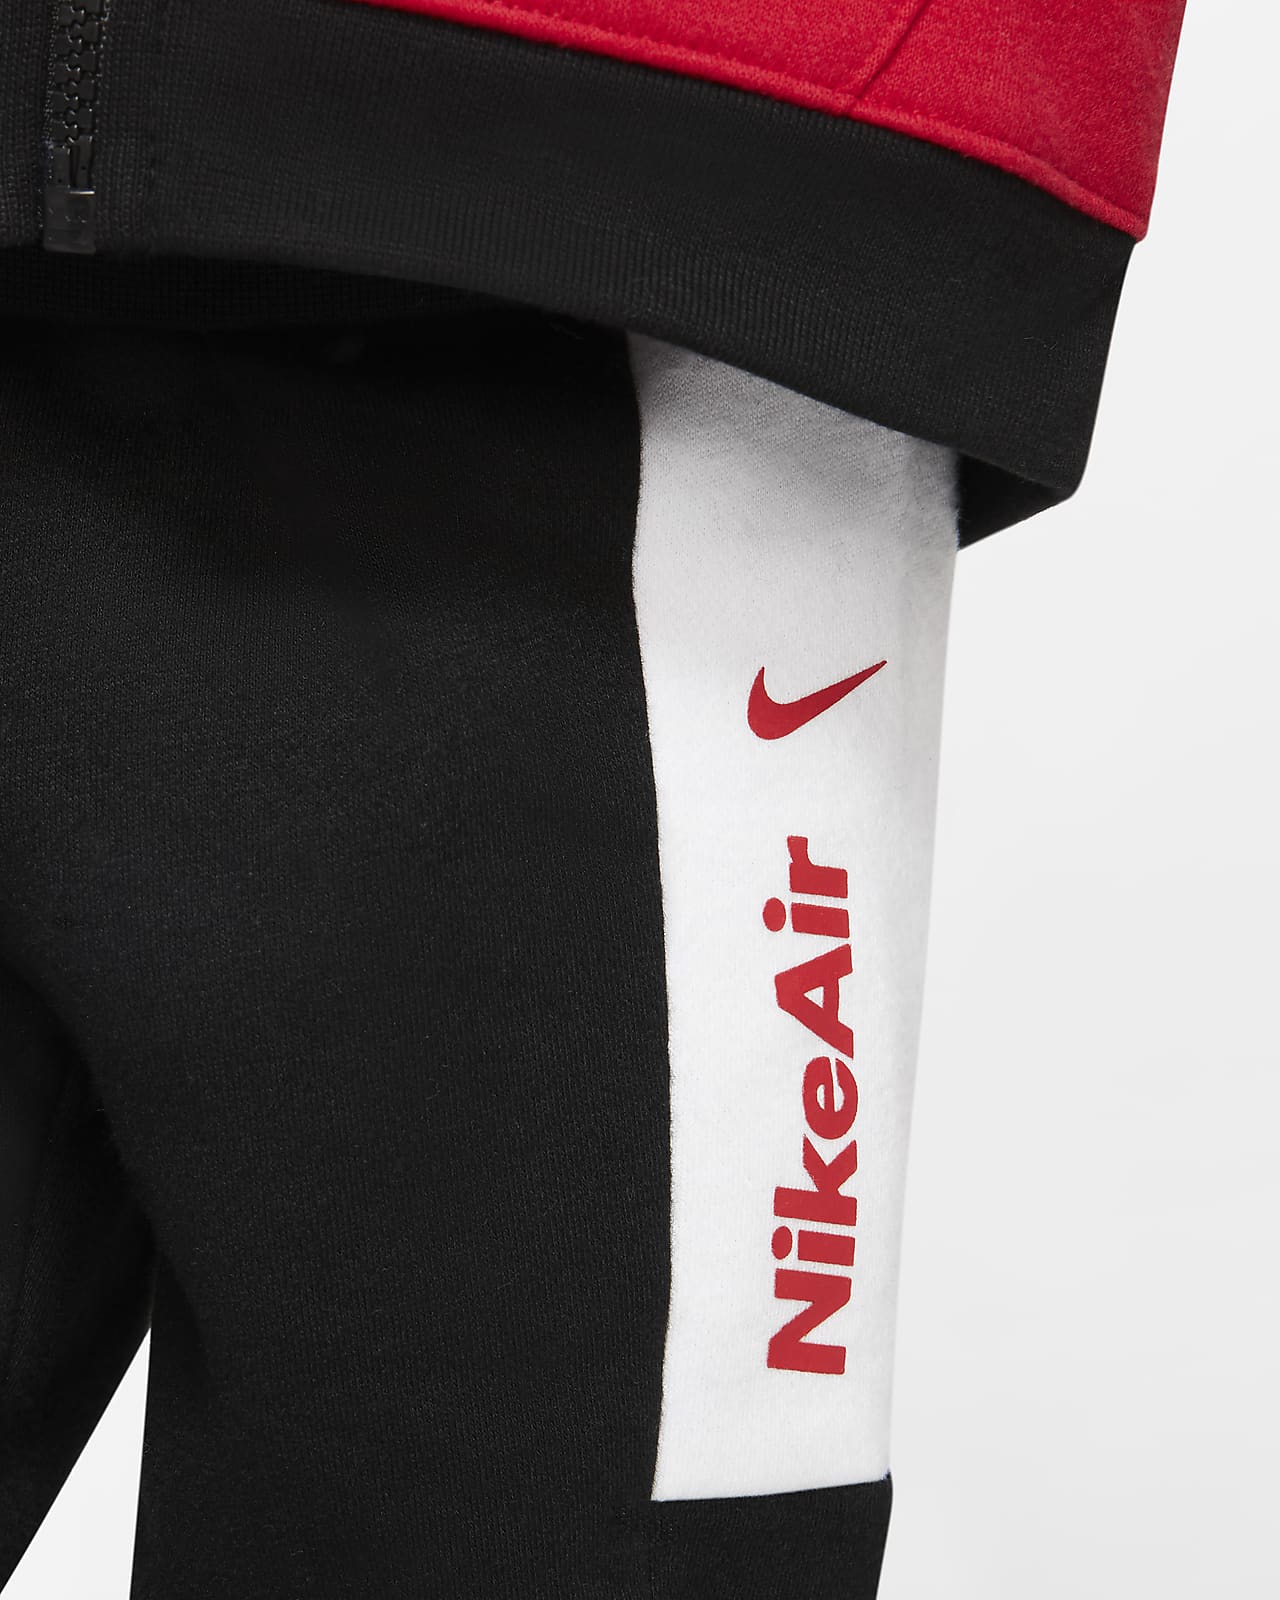 red nike air joggers